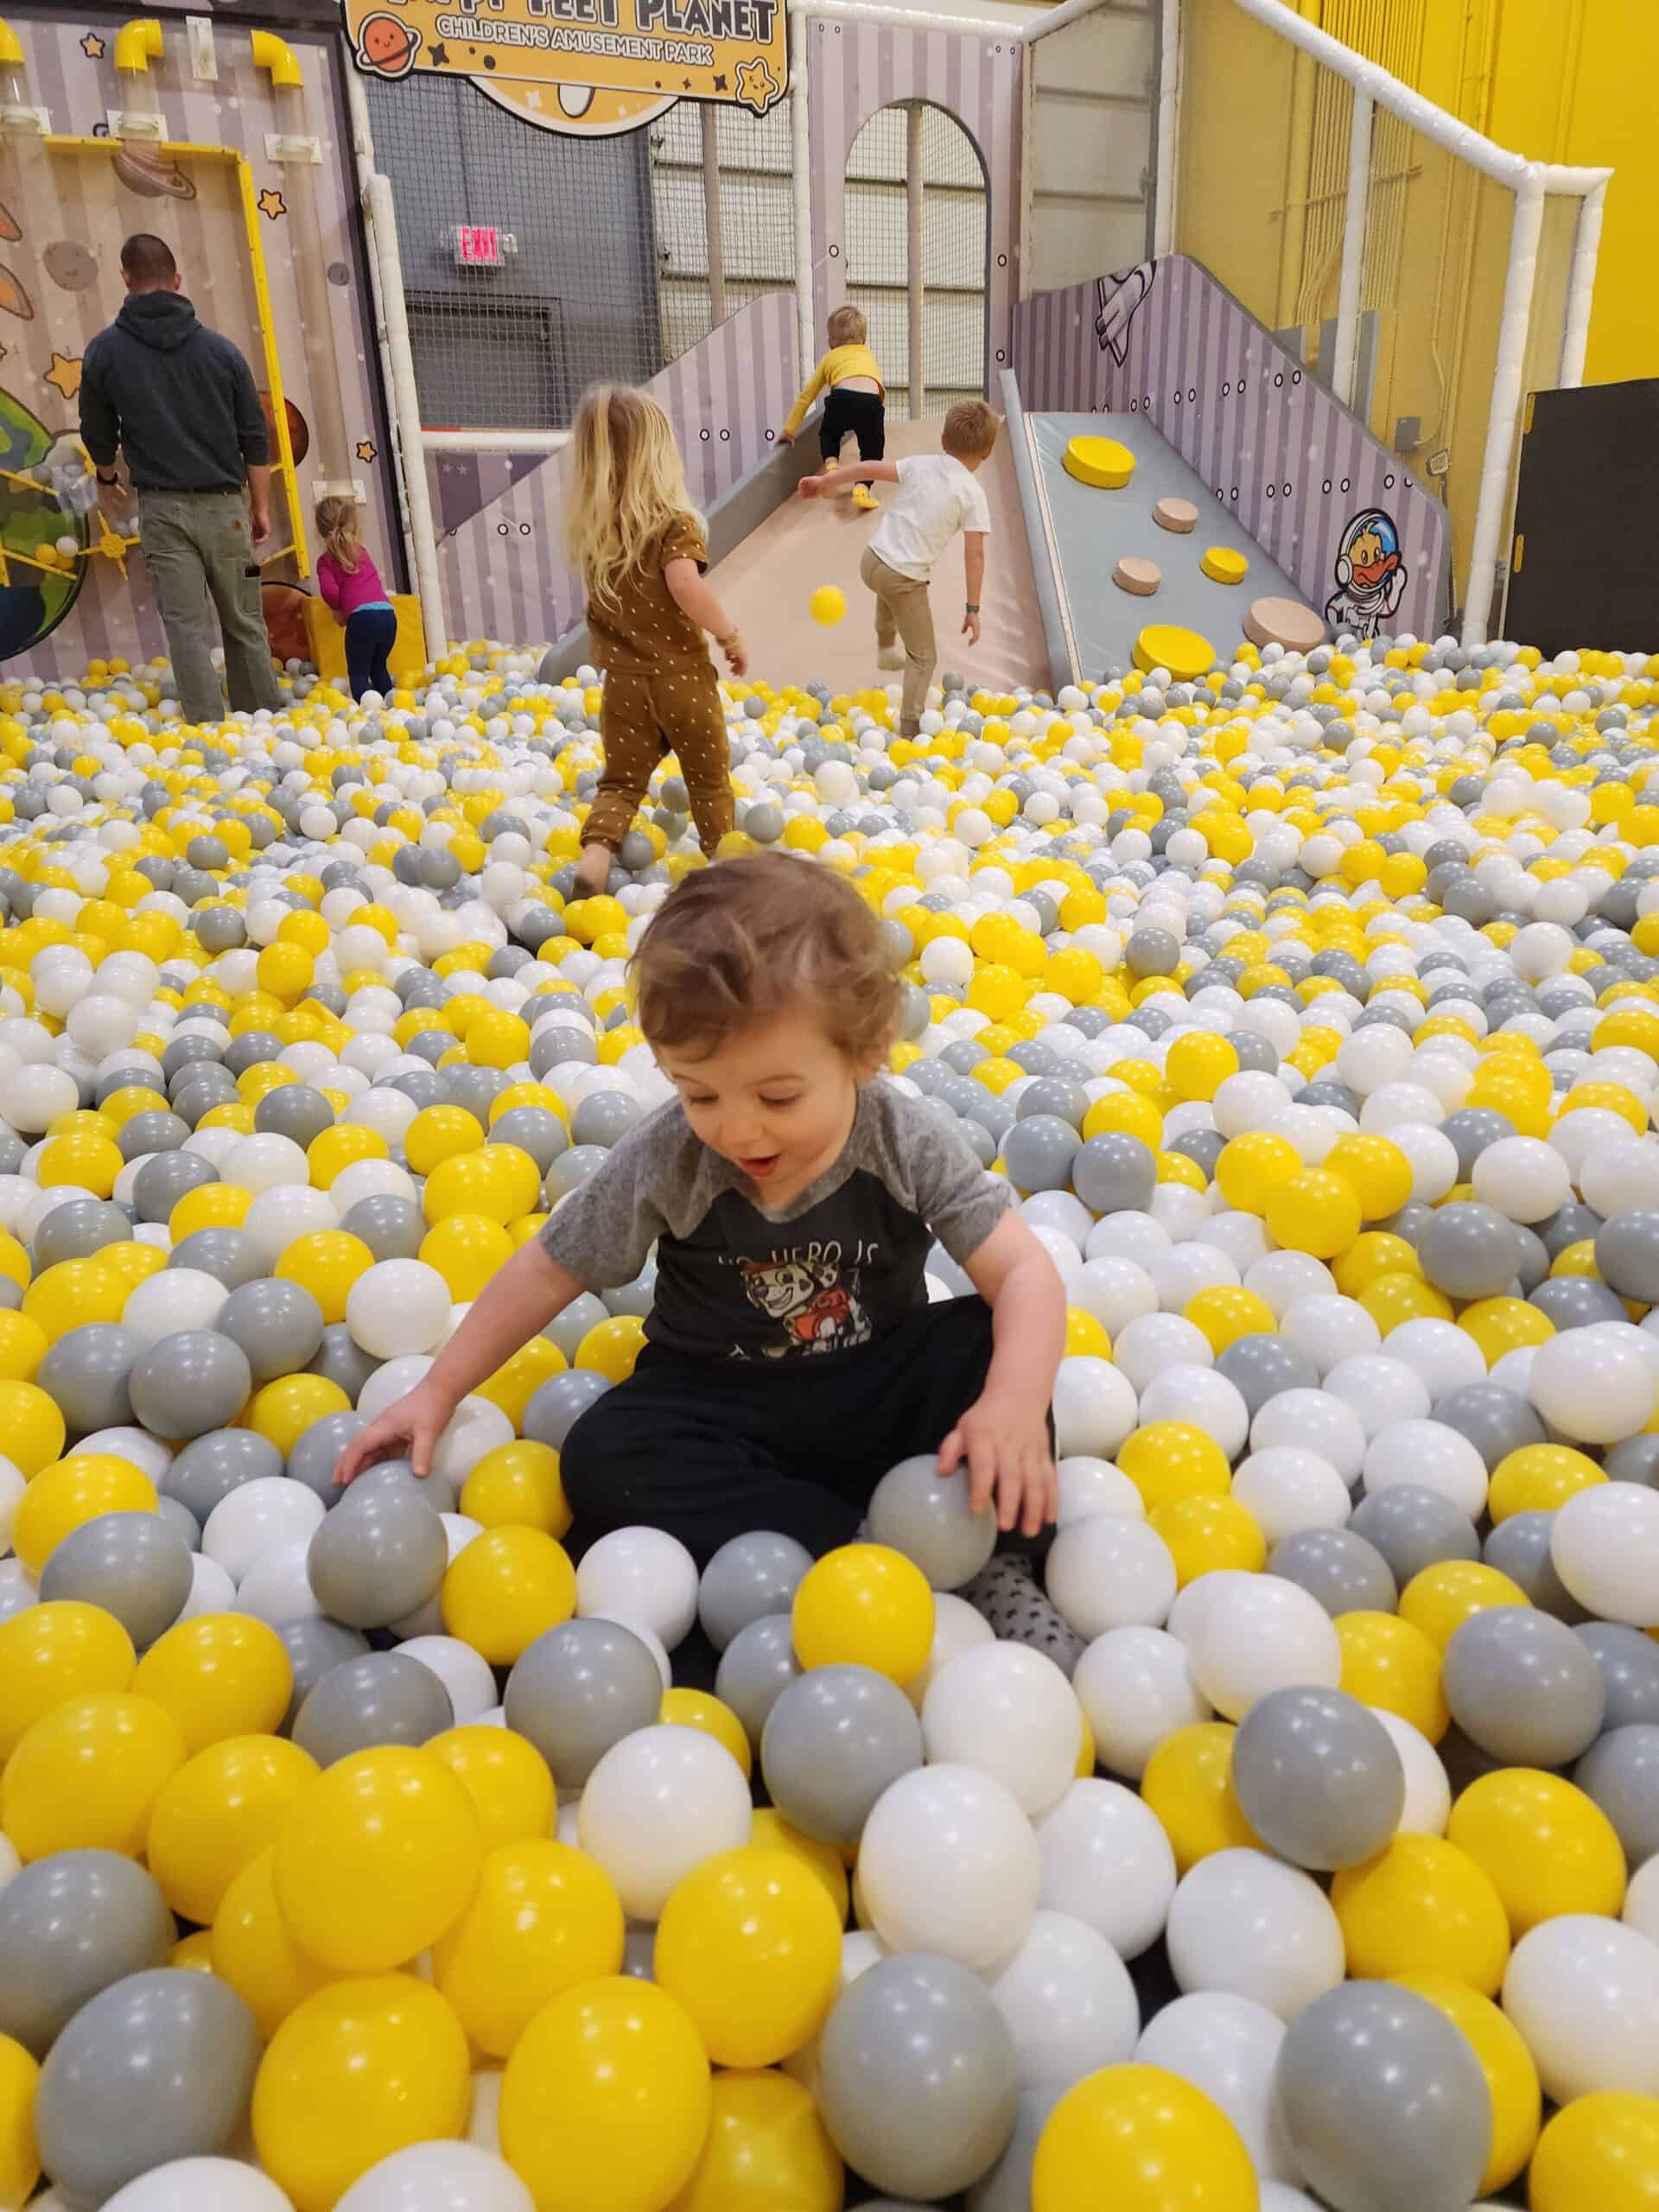 A joyful child sits among yellow and white balls in a ball pit at an indoor playground in Apex, NC, with other kids climbing and playing in the background under the watchful eye of adults